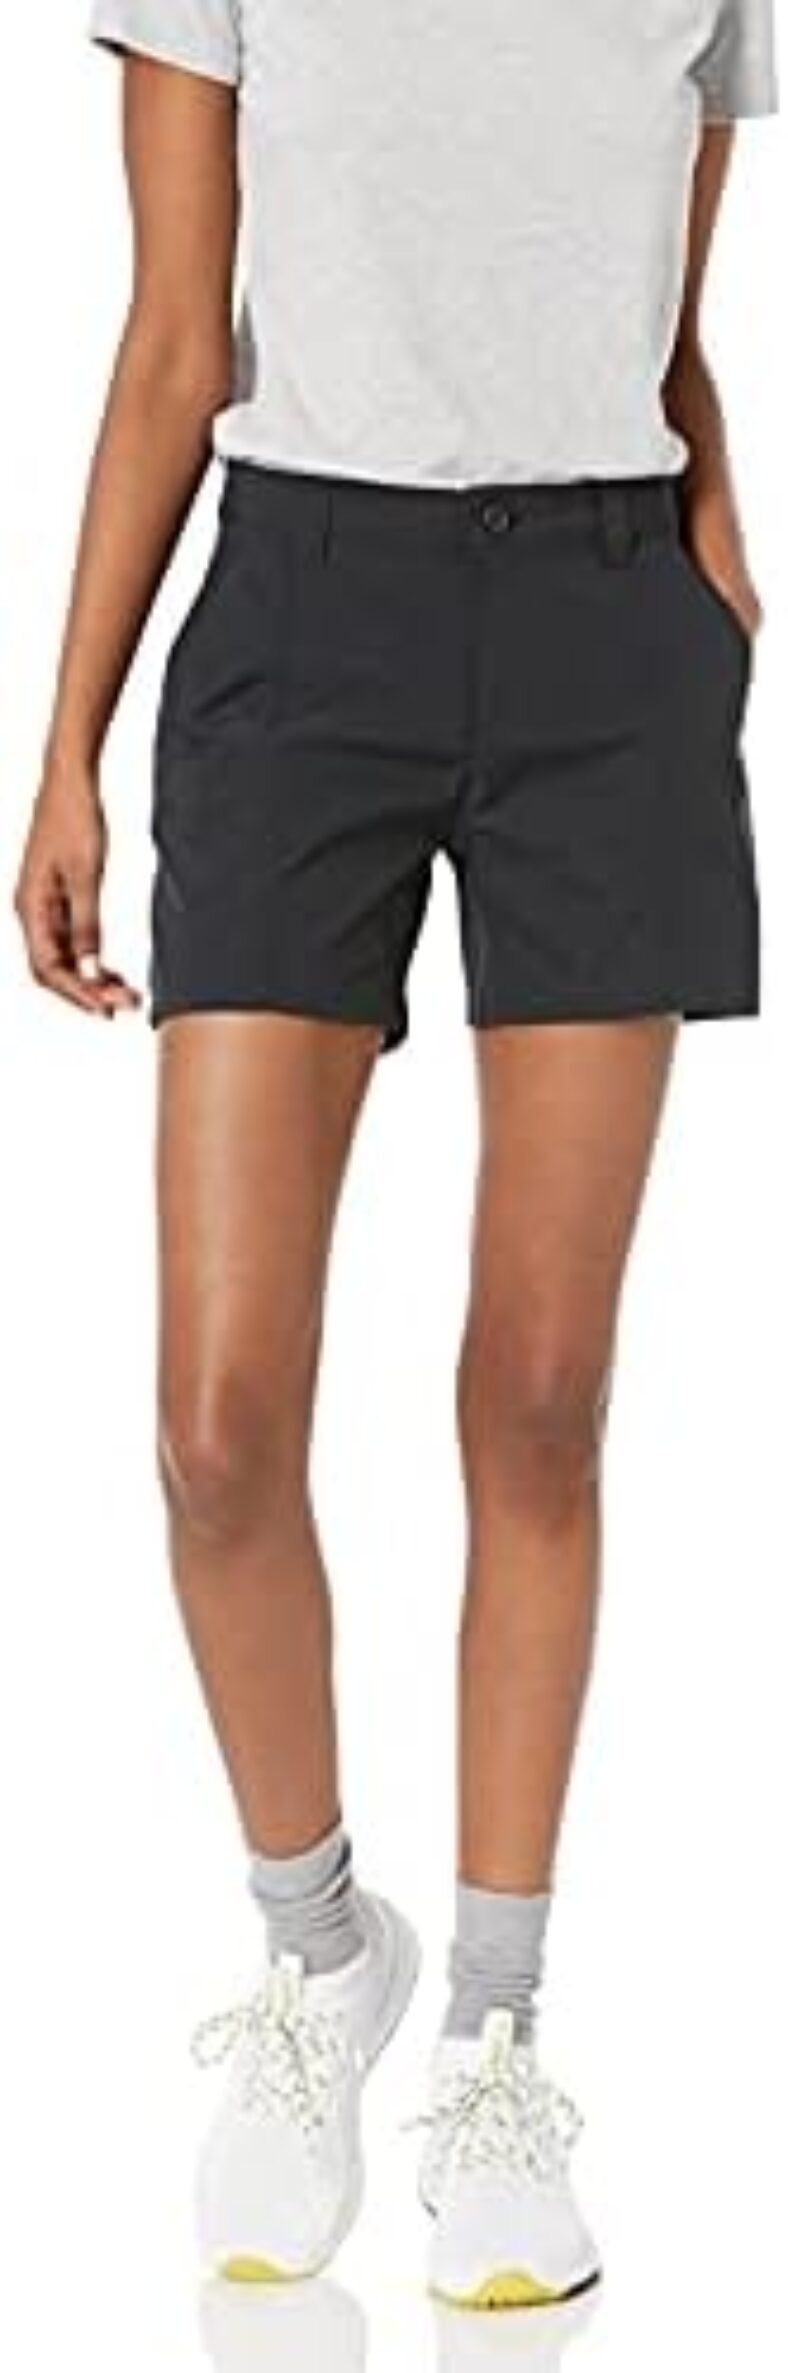 Amazon Essentials Women’s Stretch Woven 5 Inch Outdoor Hiking Shorts with Pockets